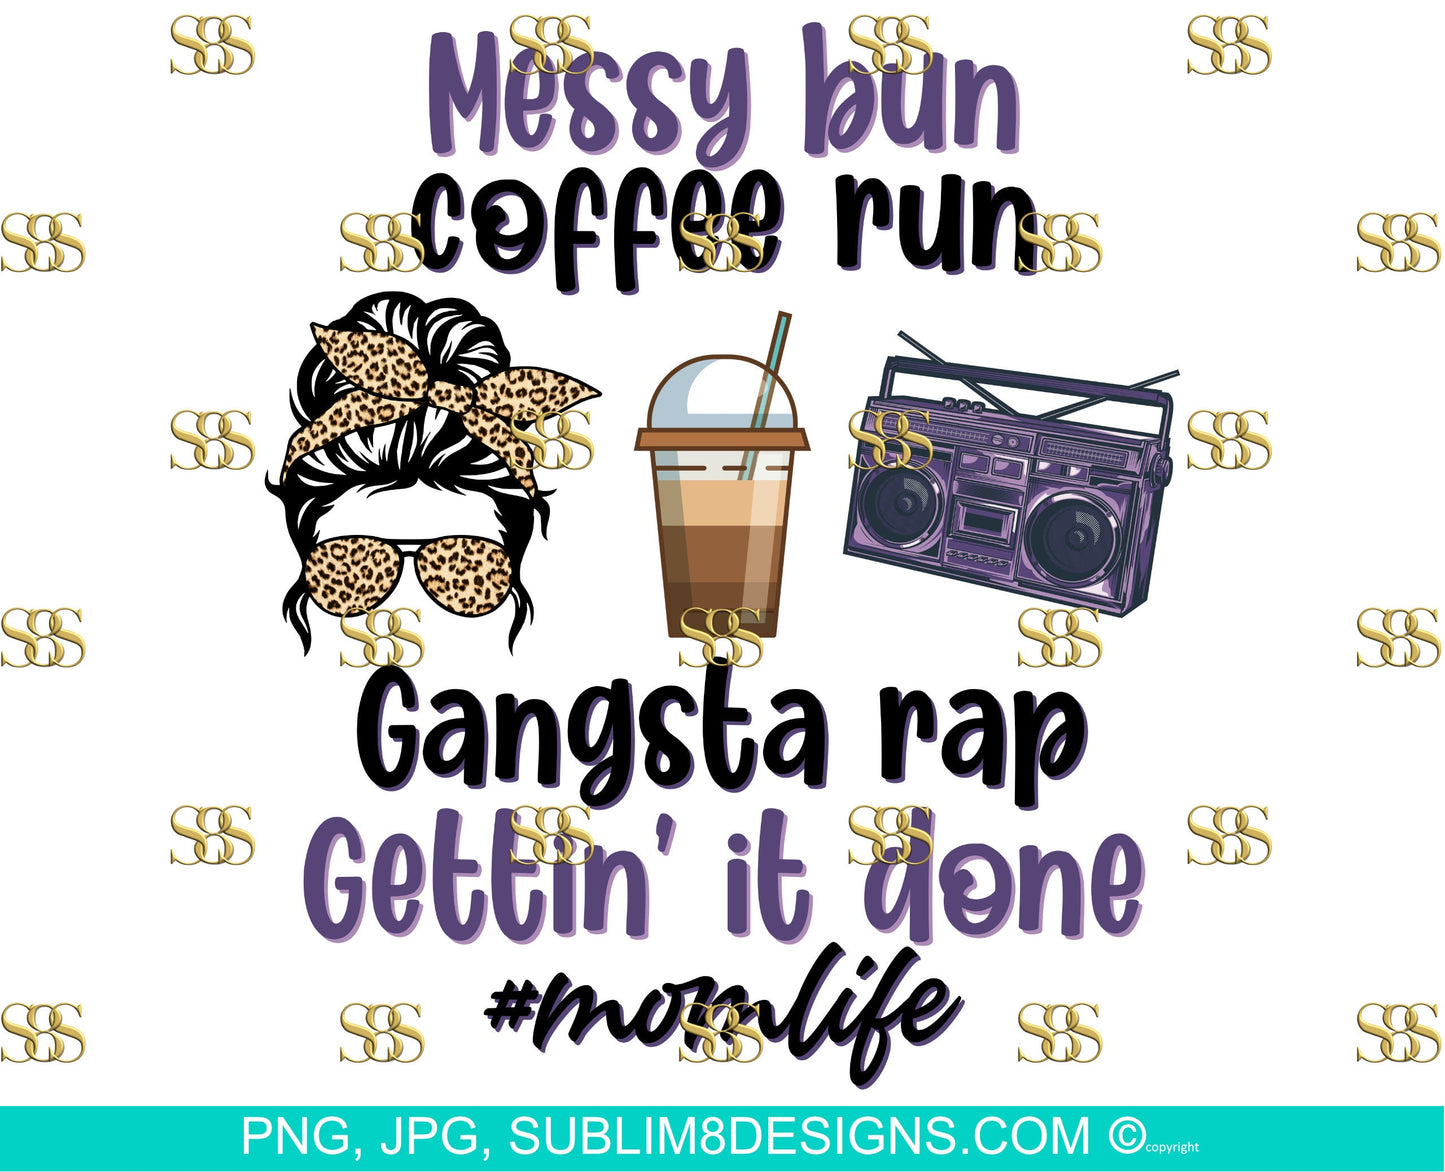 Messy Bun Coffee Run Gangsta Rap Gettin' It Done #mom life Sublimation Design PNG and JPG ONLY